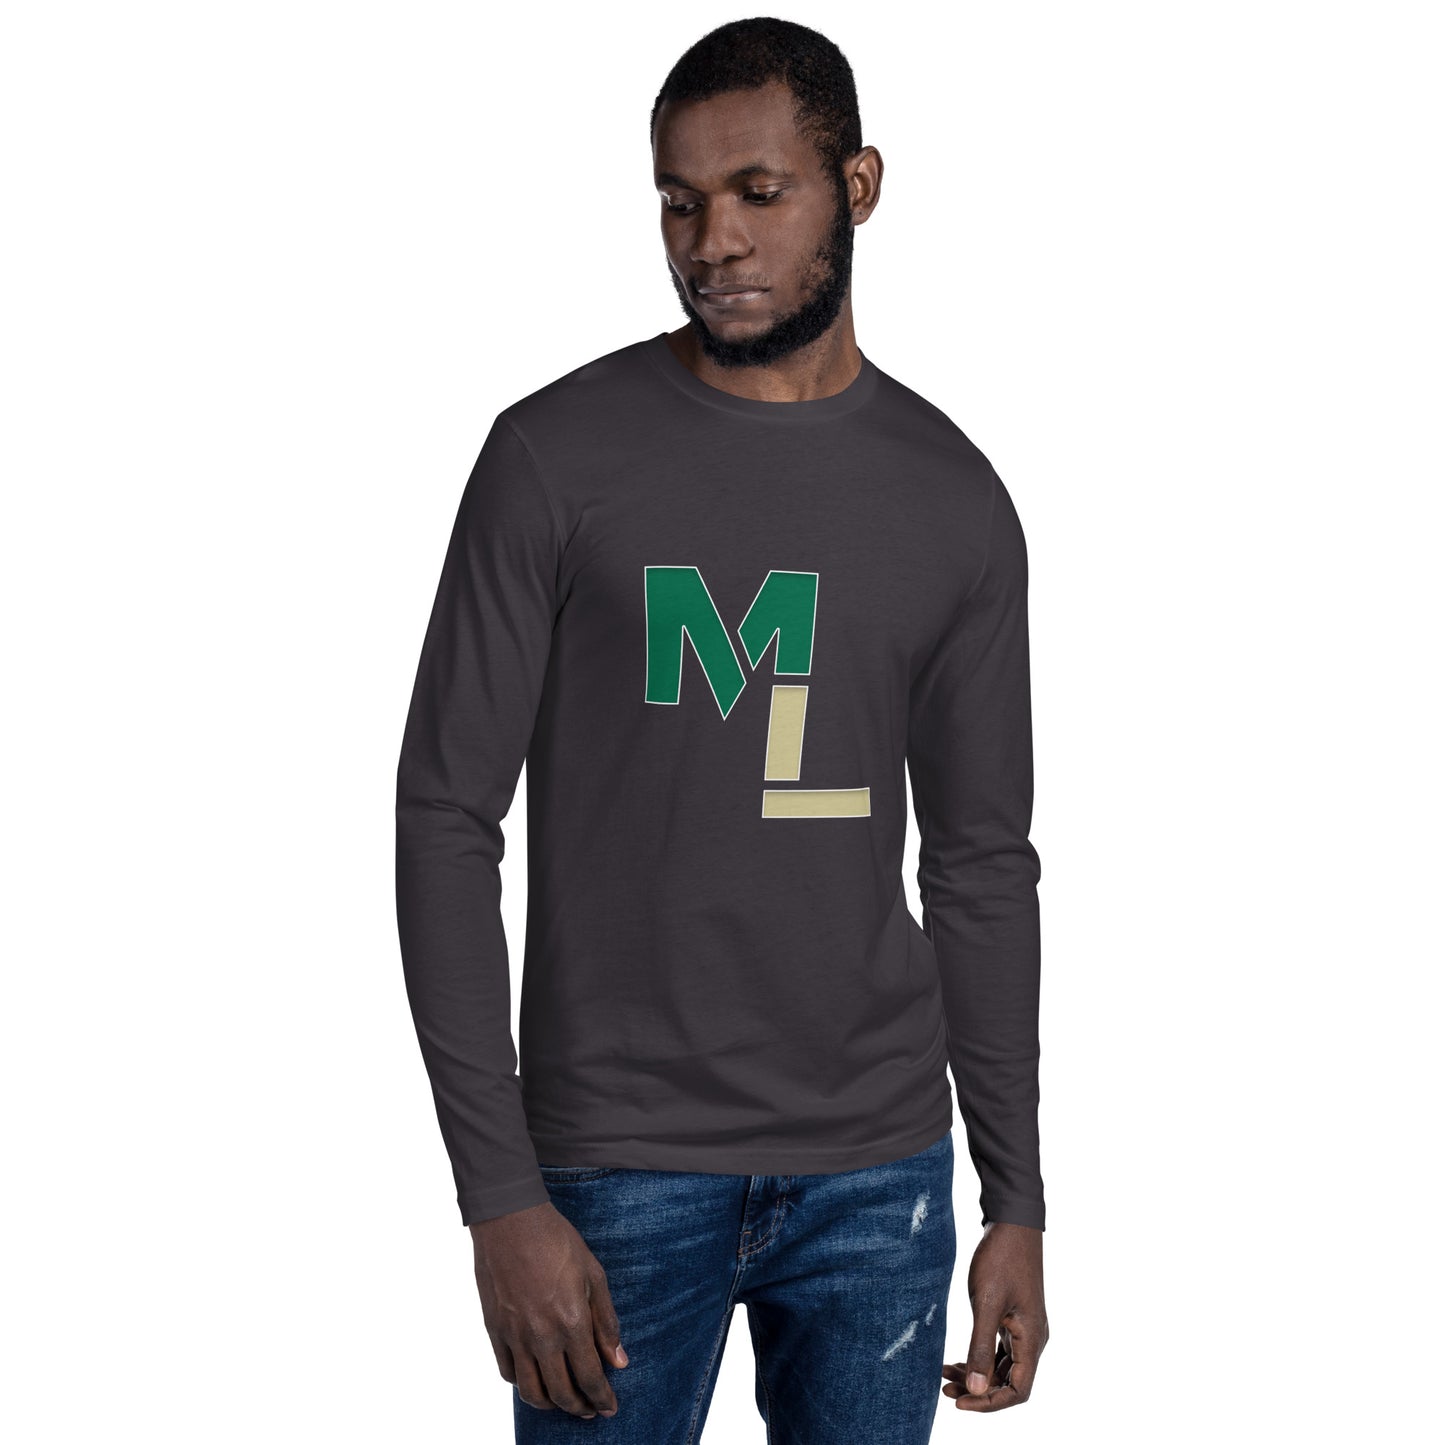 ML Long Sleeve Fitted Crew